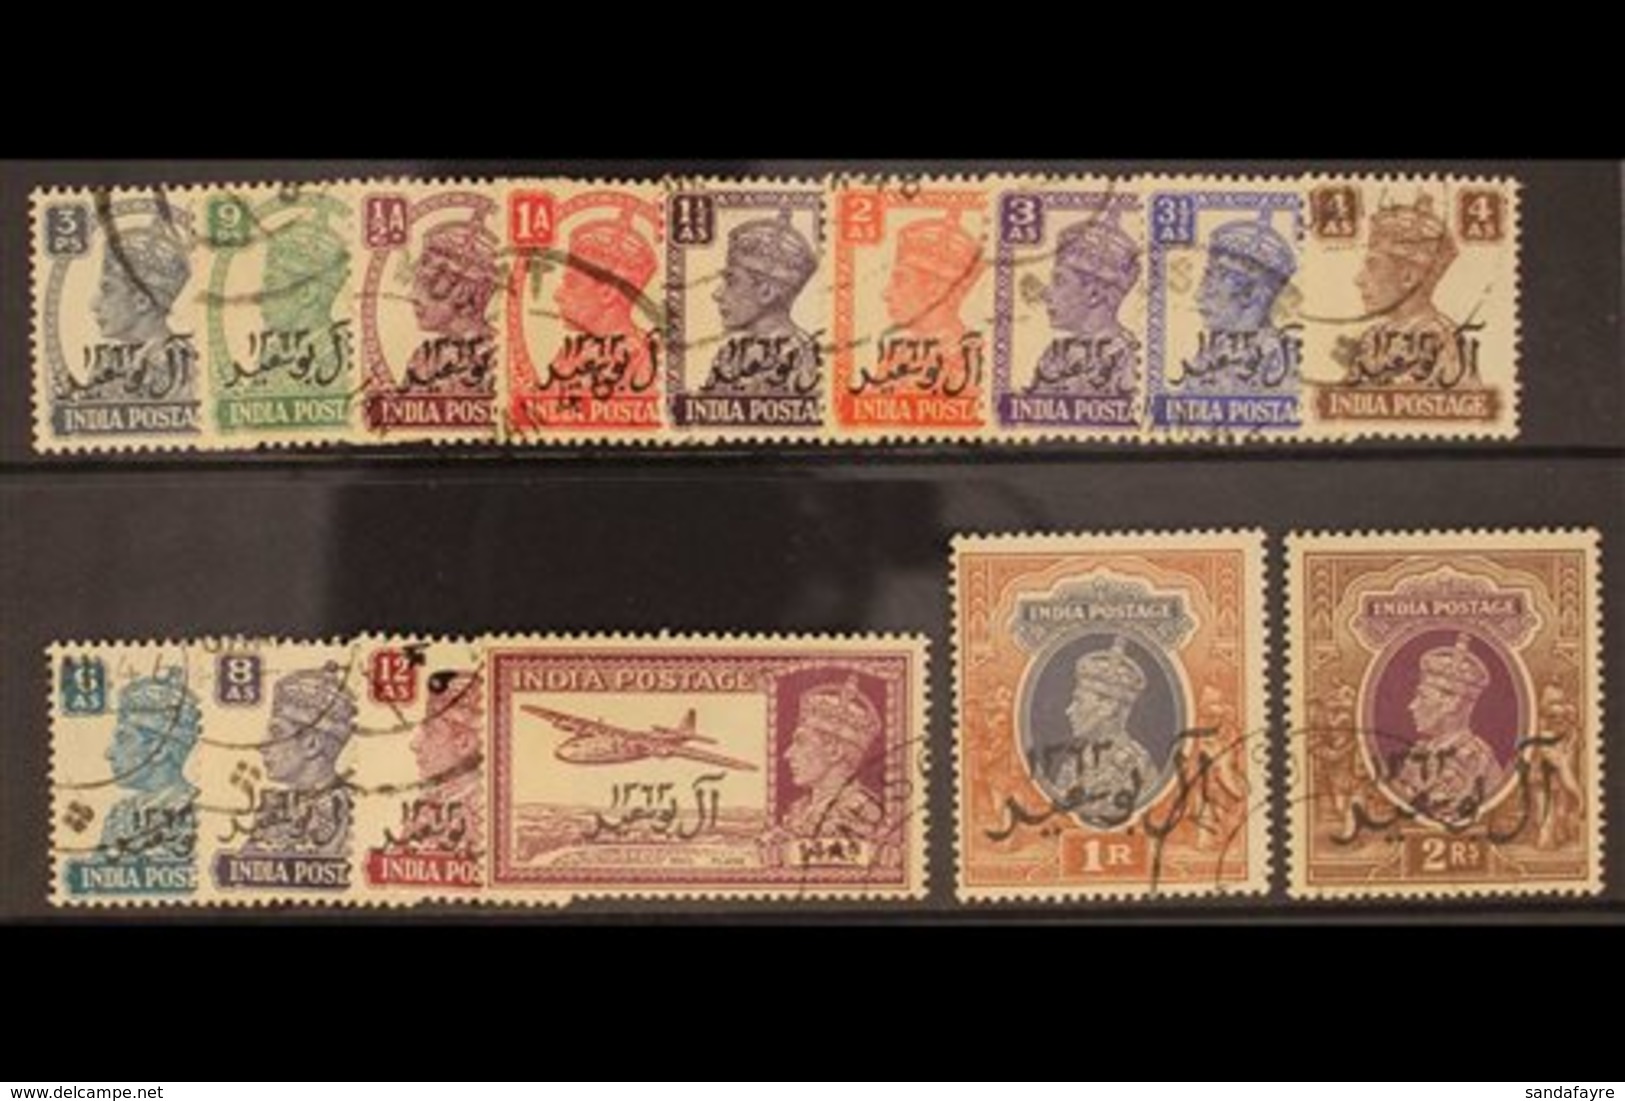 1944 Geo VI Set Ovptd Bicent. Of Al-Busaid Dynasty, Postage Set Complete, SG 1/15, Very Fine Used. (15 Stamps) For More  - Omán